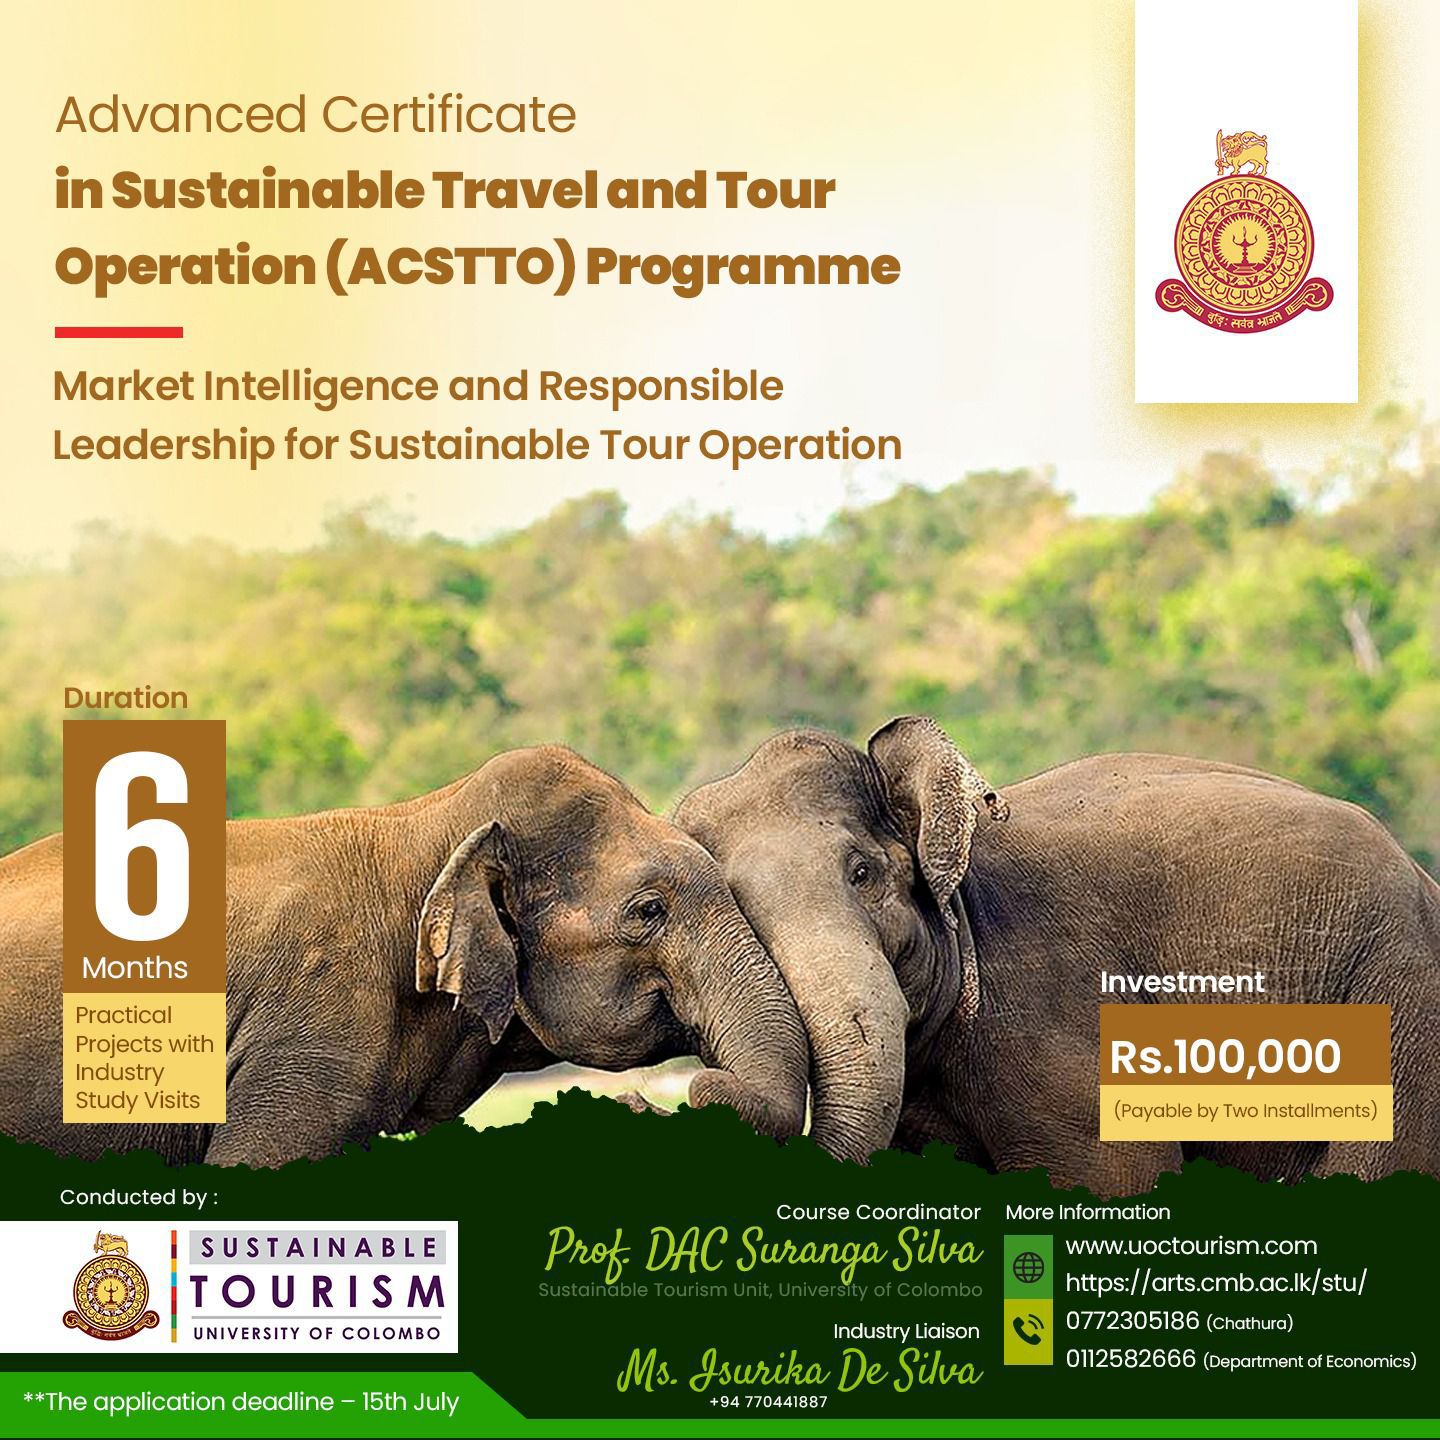 Advanced Certificate in Sustainable Travel & Tour Operation (ACSTTO) Programme